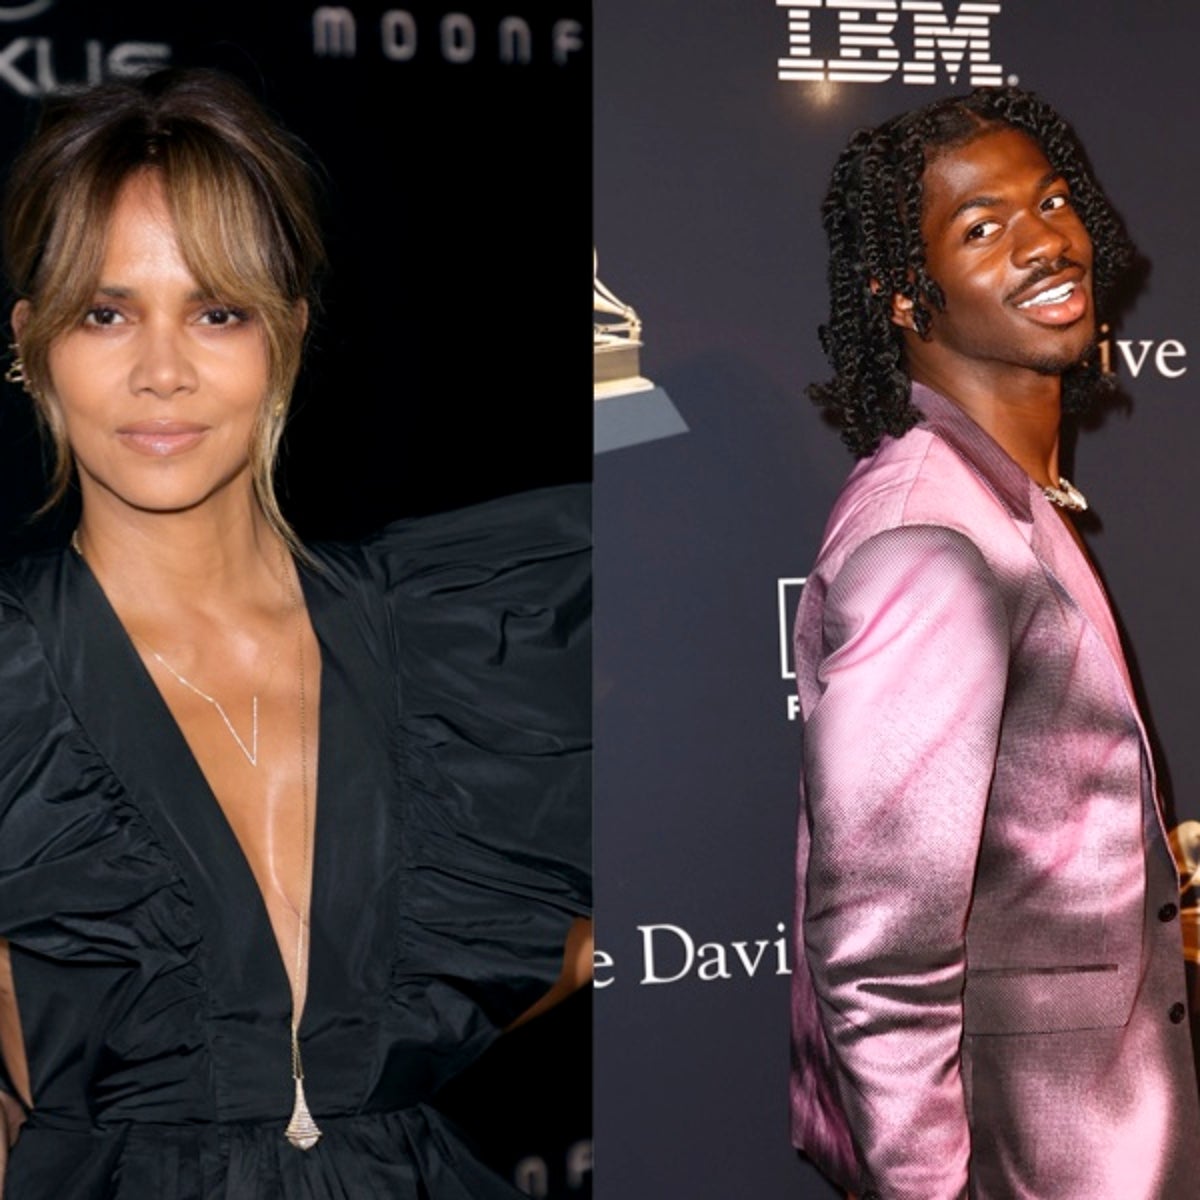 Outrage, Confusion, and Questions: How Halle Berry and Other Celebrities Reacted to Losing Their Twitter Blue Ticks?